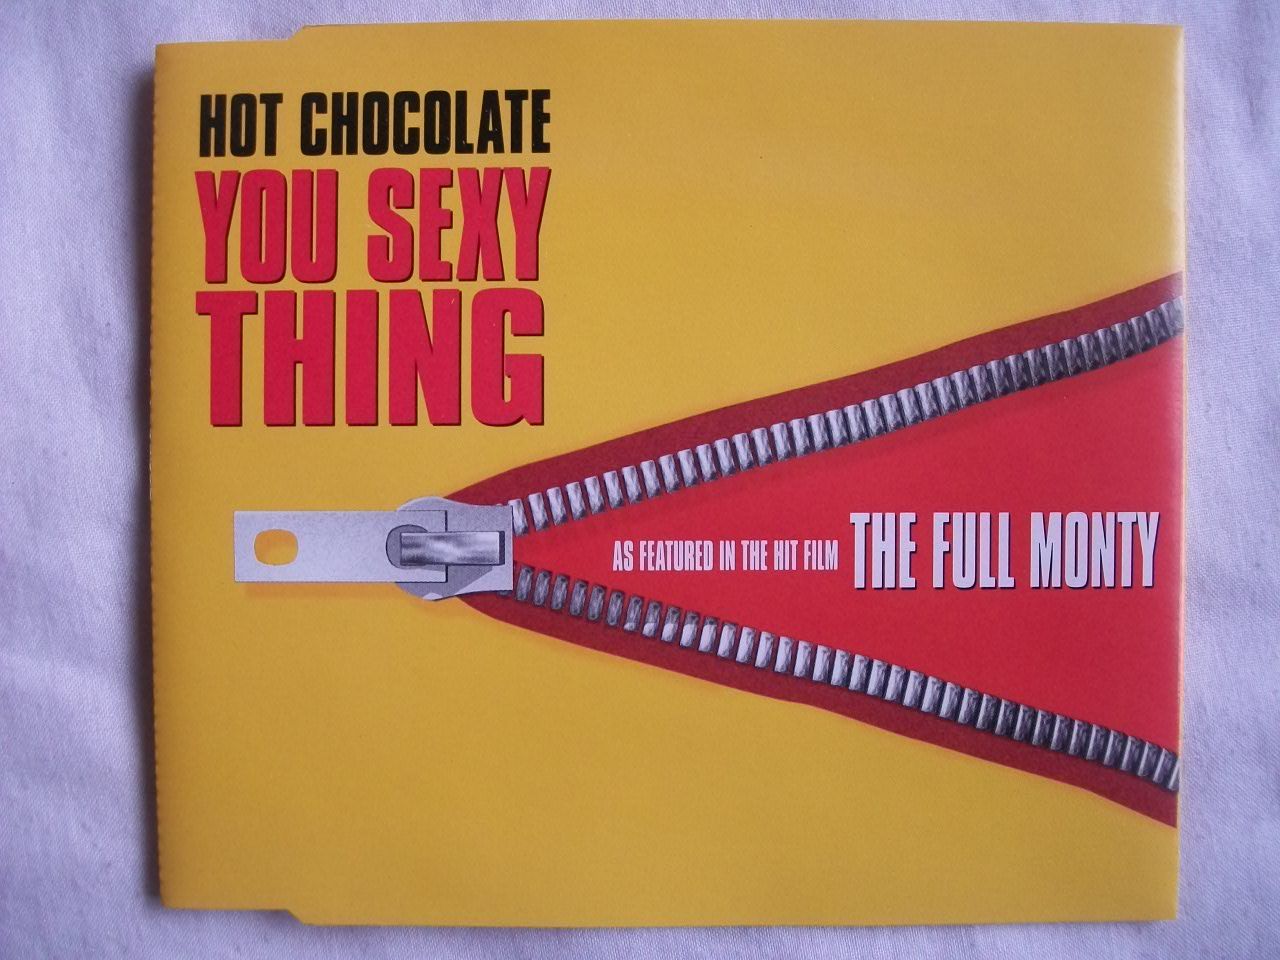 Hot Chocolate You Sexy Thing Records Lps Vinyl And Cds Musicstack 